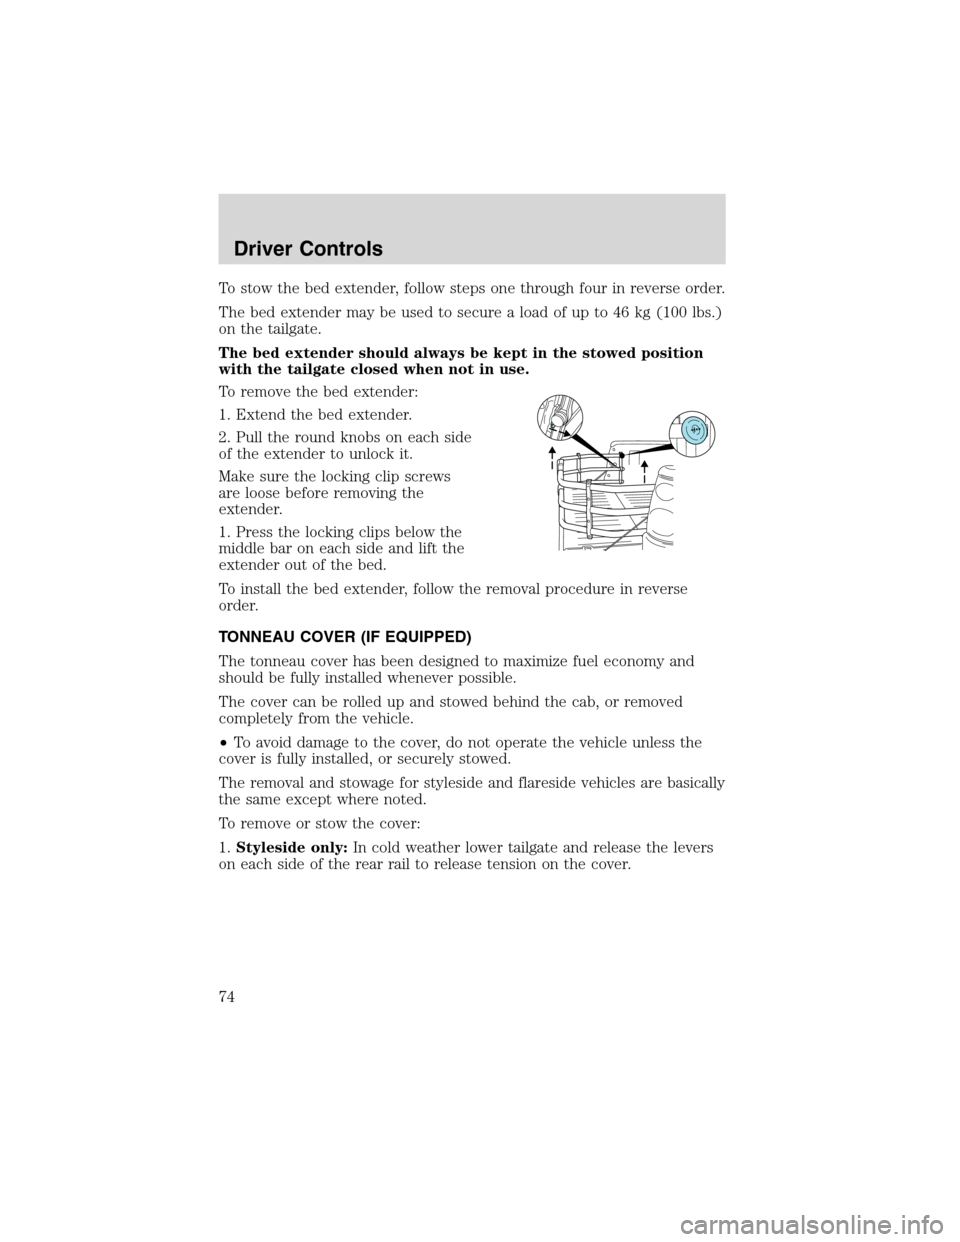 FORD F150 2003 10.G Owners Manual To stow the bed extender, follow steps one through four in reverse order.
The bed extender may be used to secure a load of up to 46 kg (100 lbs.)
on the tailgate.
The bed extender should always be kep